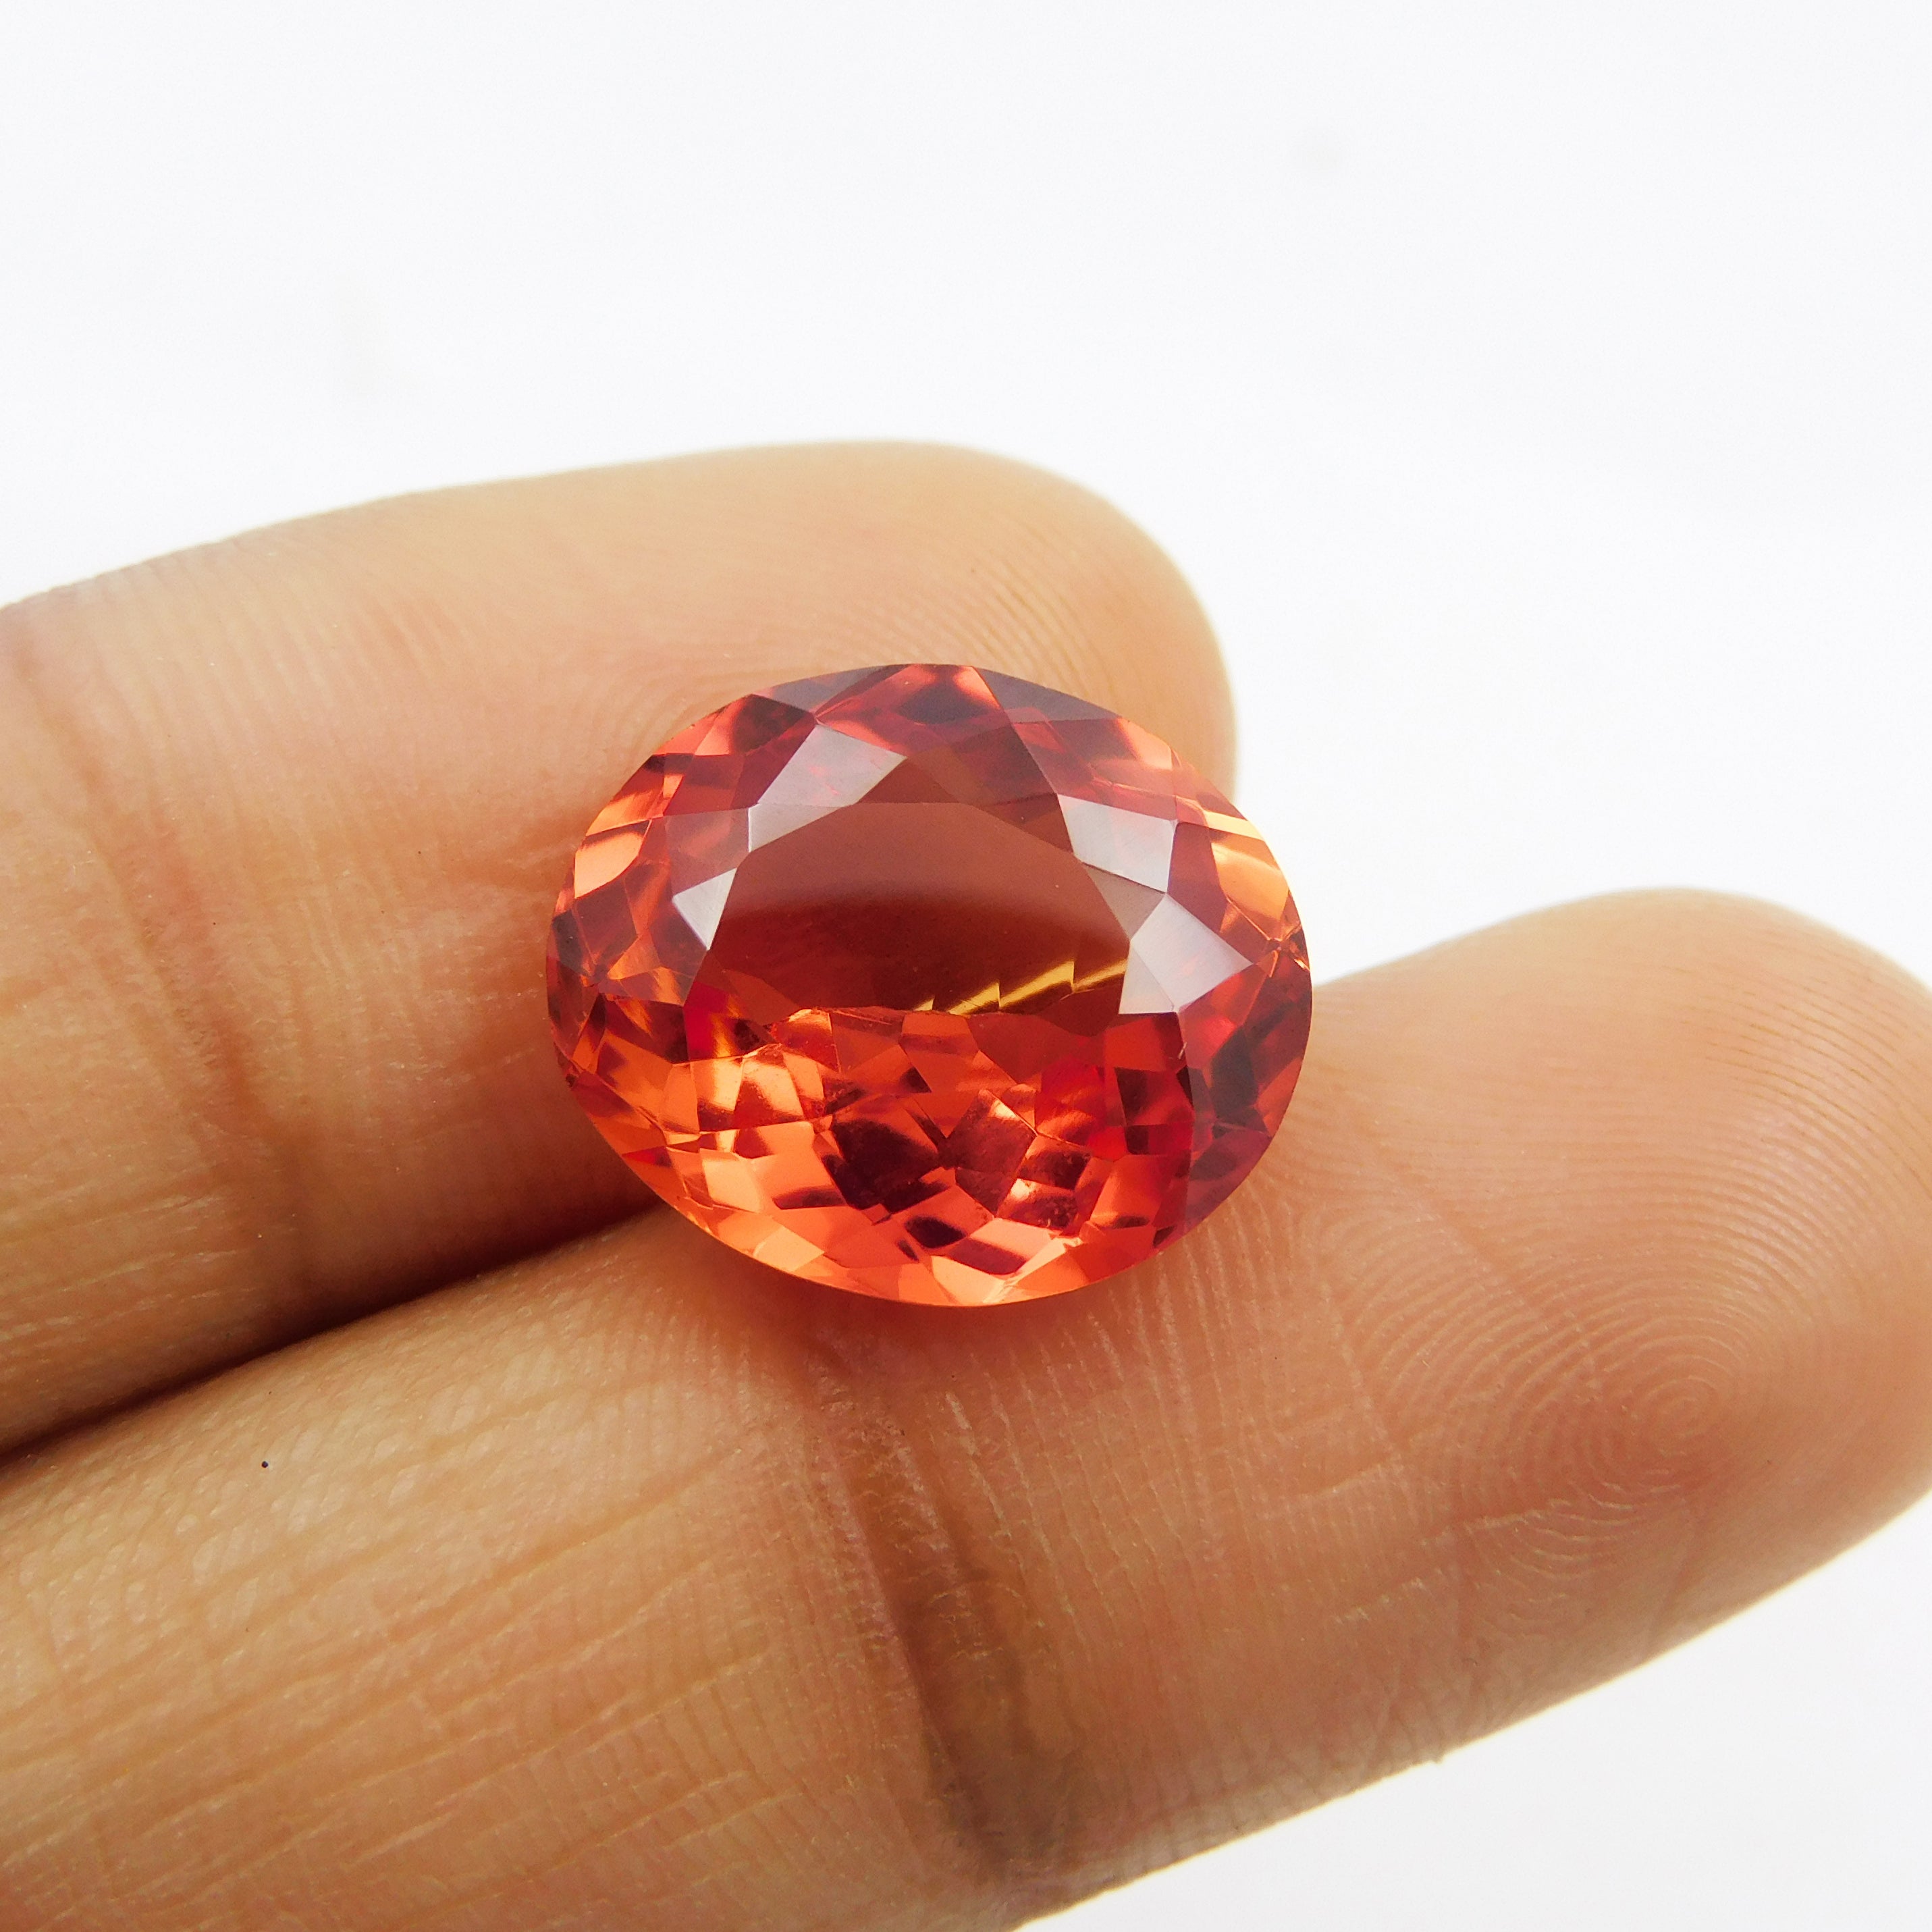 Special Gift For Her / Him | Purchase It | Natural Sapphire 7.84 Carat Orange Sapphire Oval Shape Certified Loose Gemstone | Best Gem With Best Sell Offer